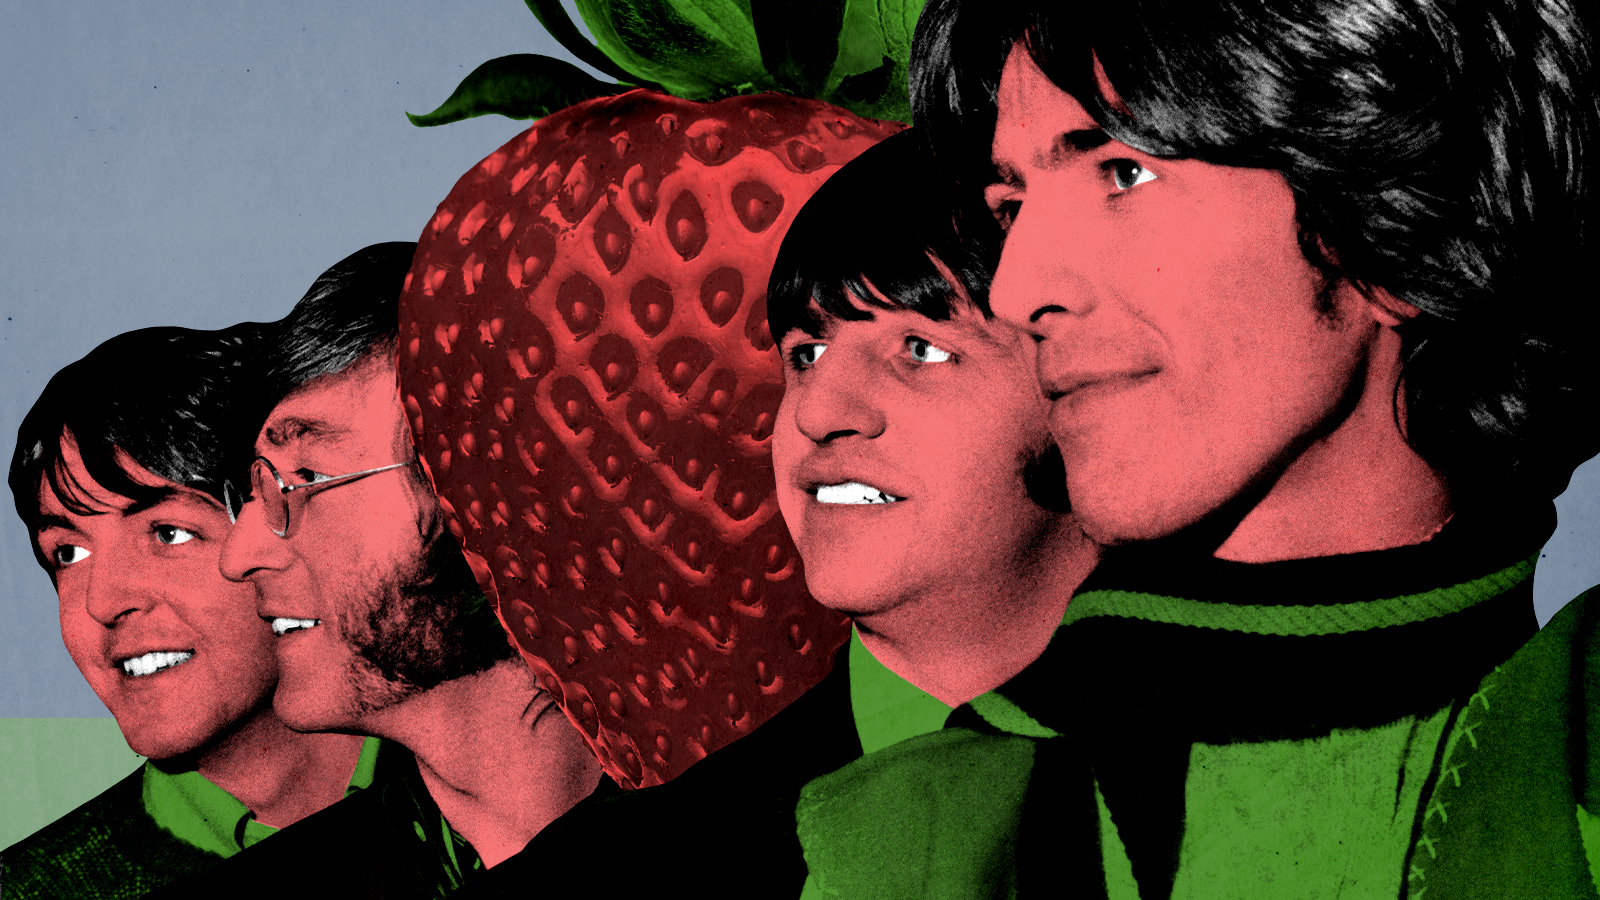 Rolling Stone claims 'Strawberry Fields Forever' is the best Beatles song and nothing is real | The Week